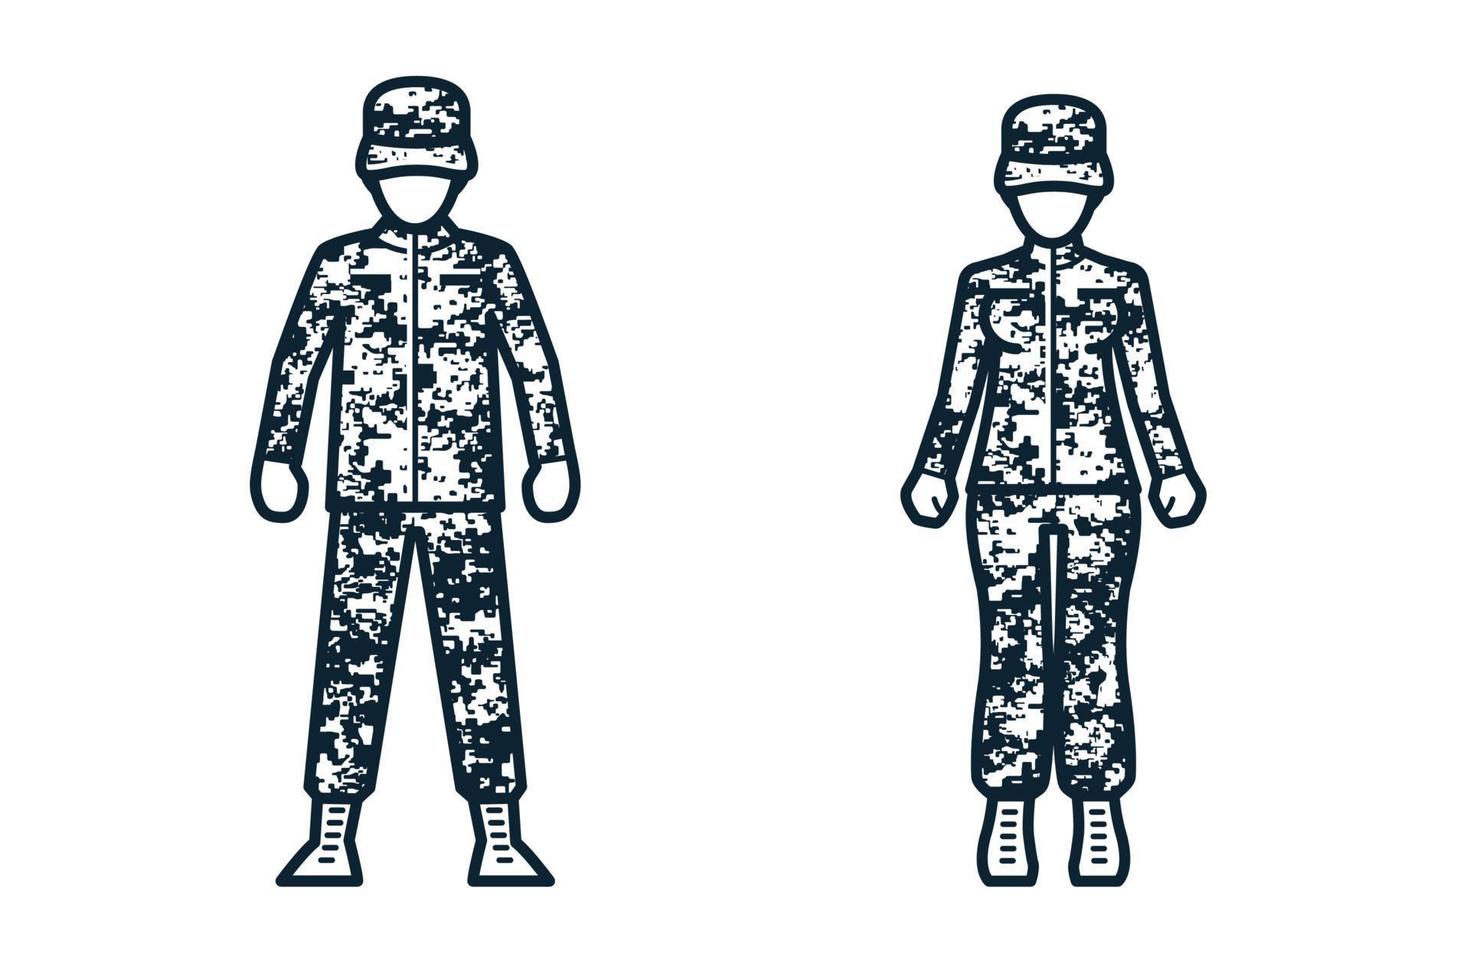 Soldier, Army, Uniform and People icons vector